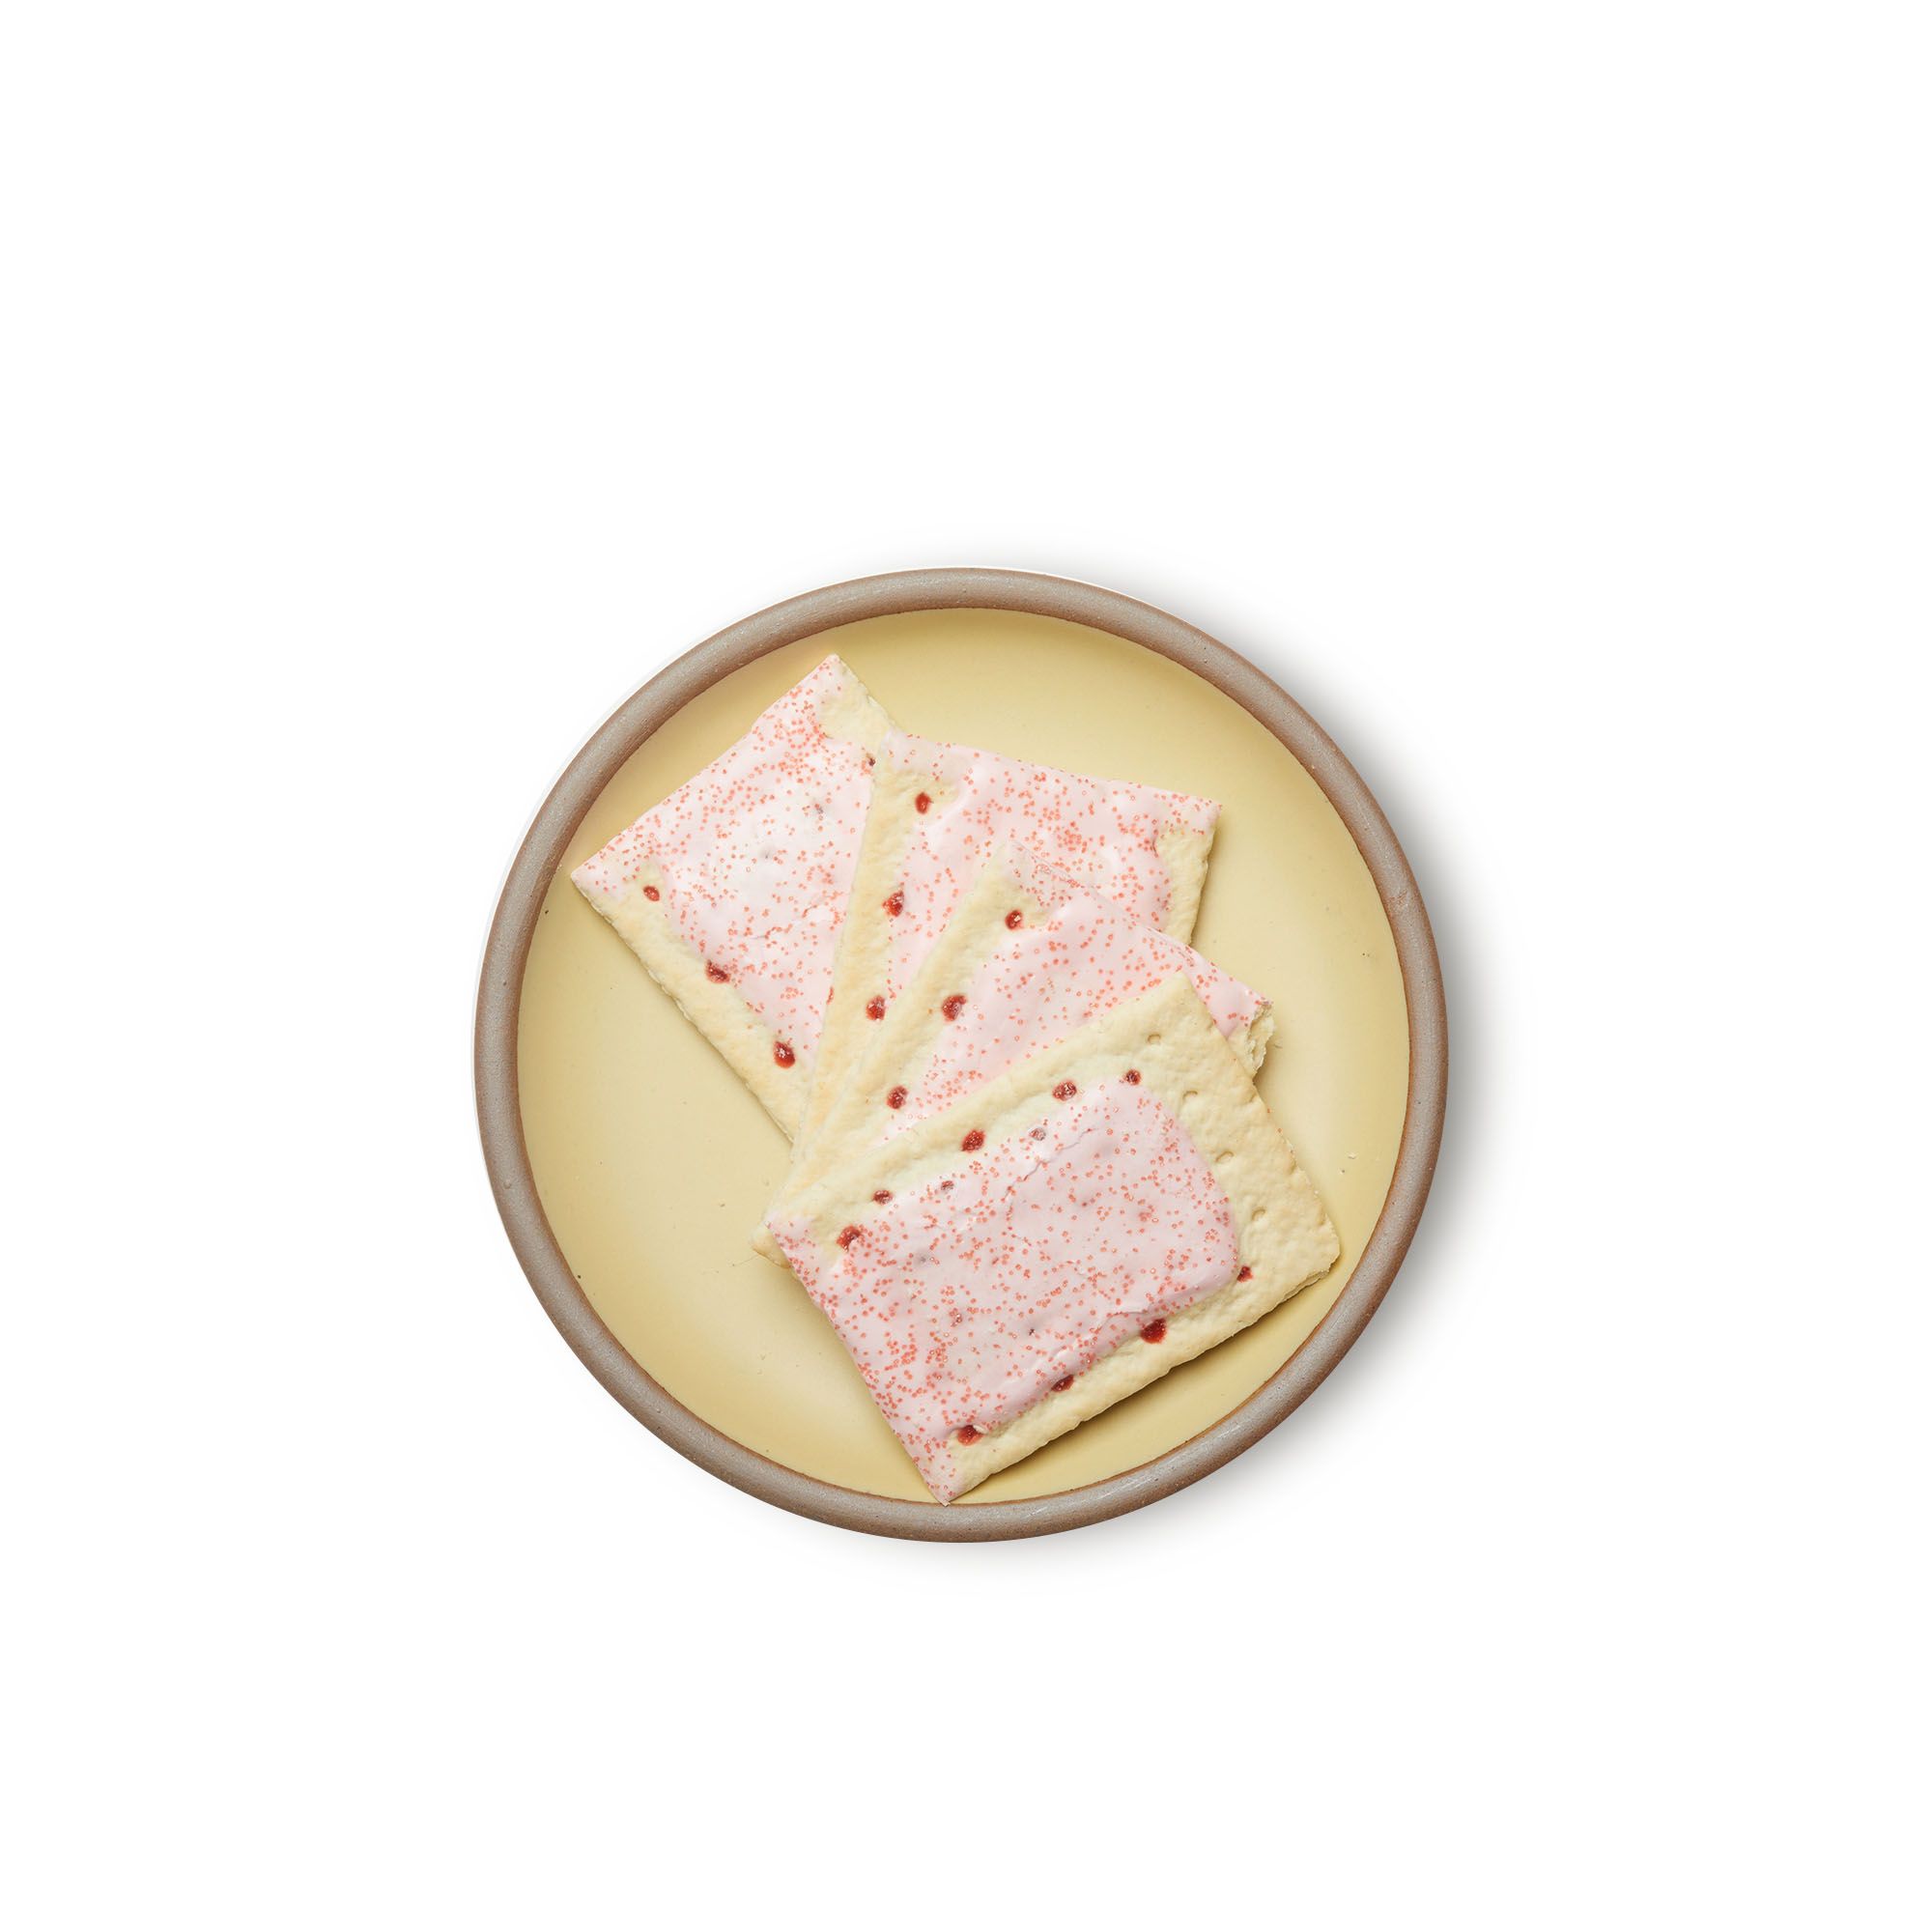 Pop-tarts on a medium sized ceramic plate in a light butter yellow color featuring iron speckles and an unglazed rim.